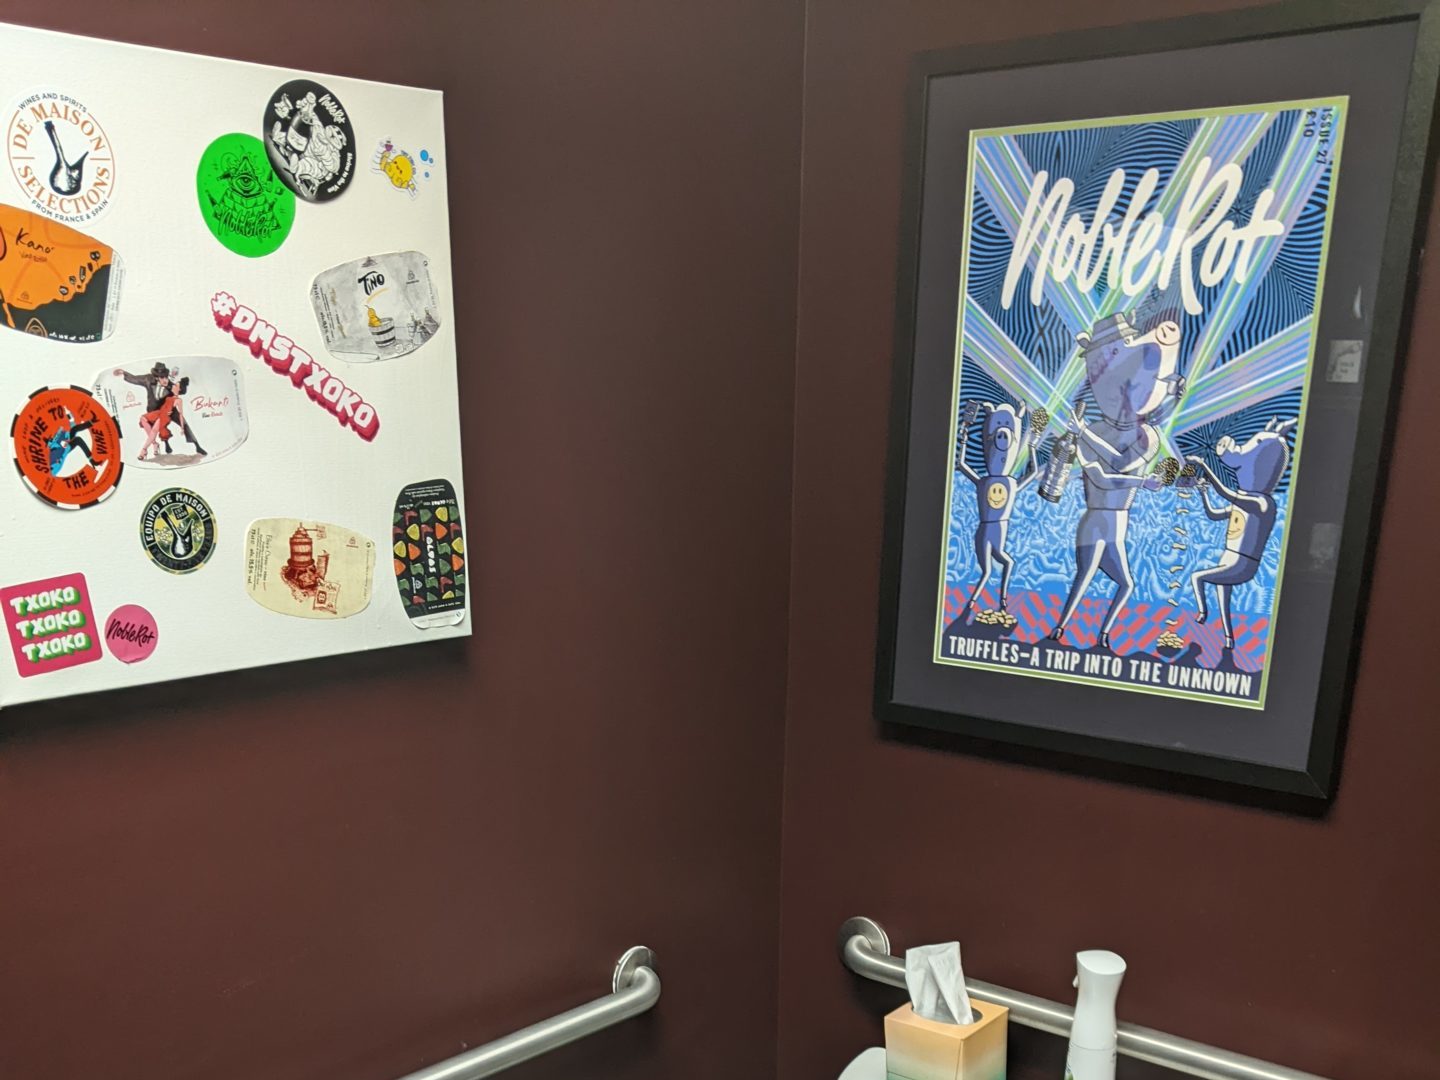 Two wall hangings above a toilet. One is a white board covered in stickers. The other is artwork in a black frame with the words Noble Rot over images of pigs drinking wine.